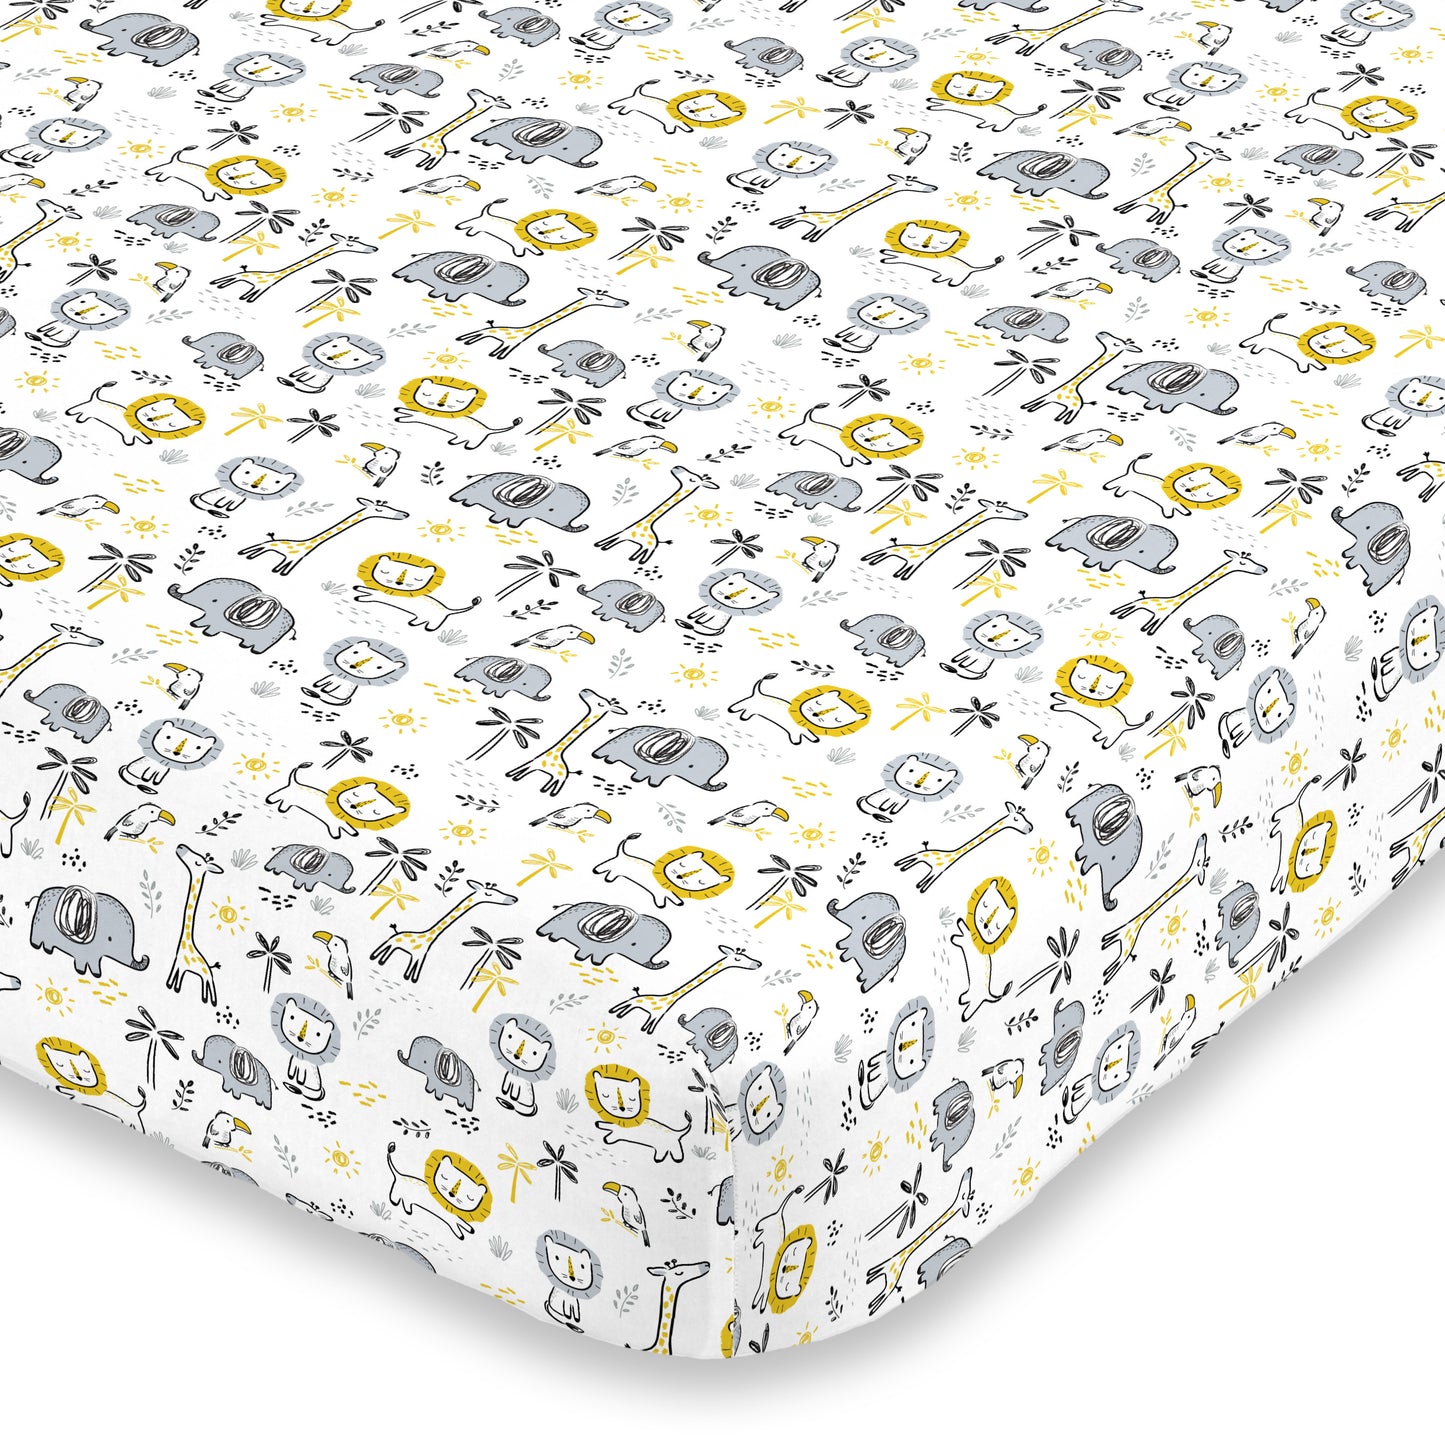 Little Love by NoJo Roarsome Lion - Grey, Yellow, White 3 Piece Nursery Crib Bedding Set with Comforter, Fitted Crib Sheet, Dust Ruffle